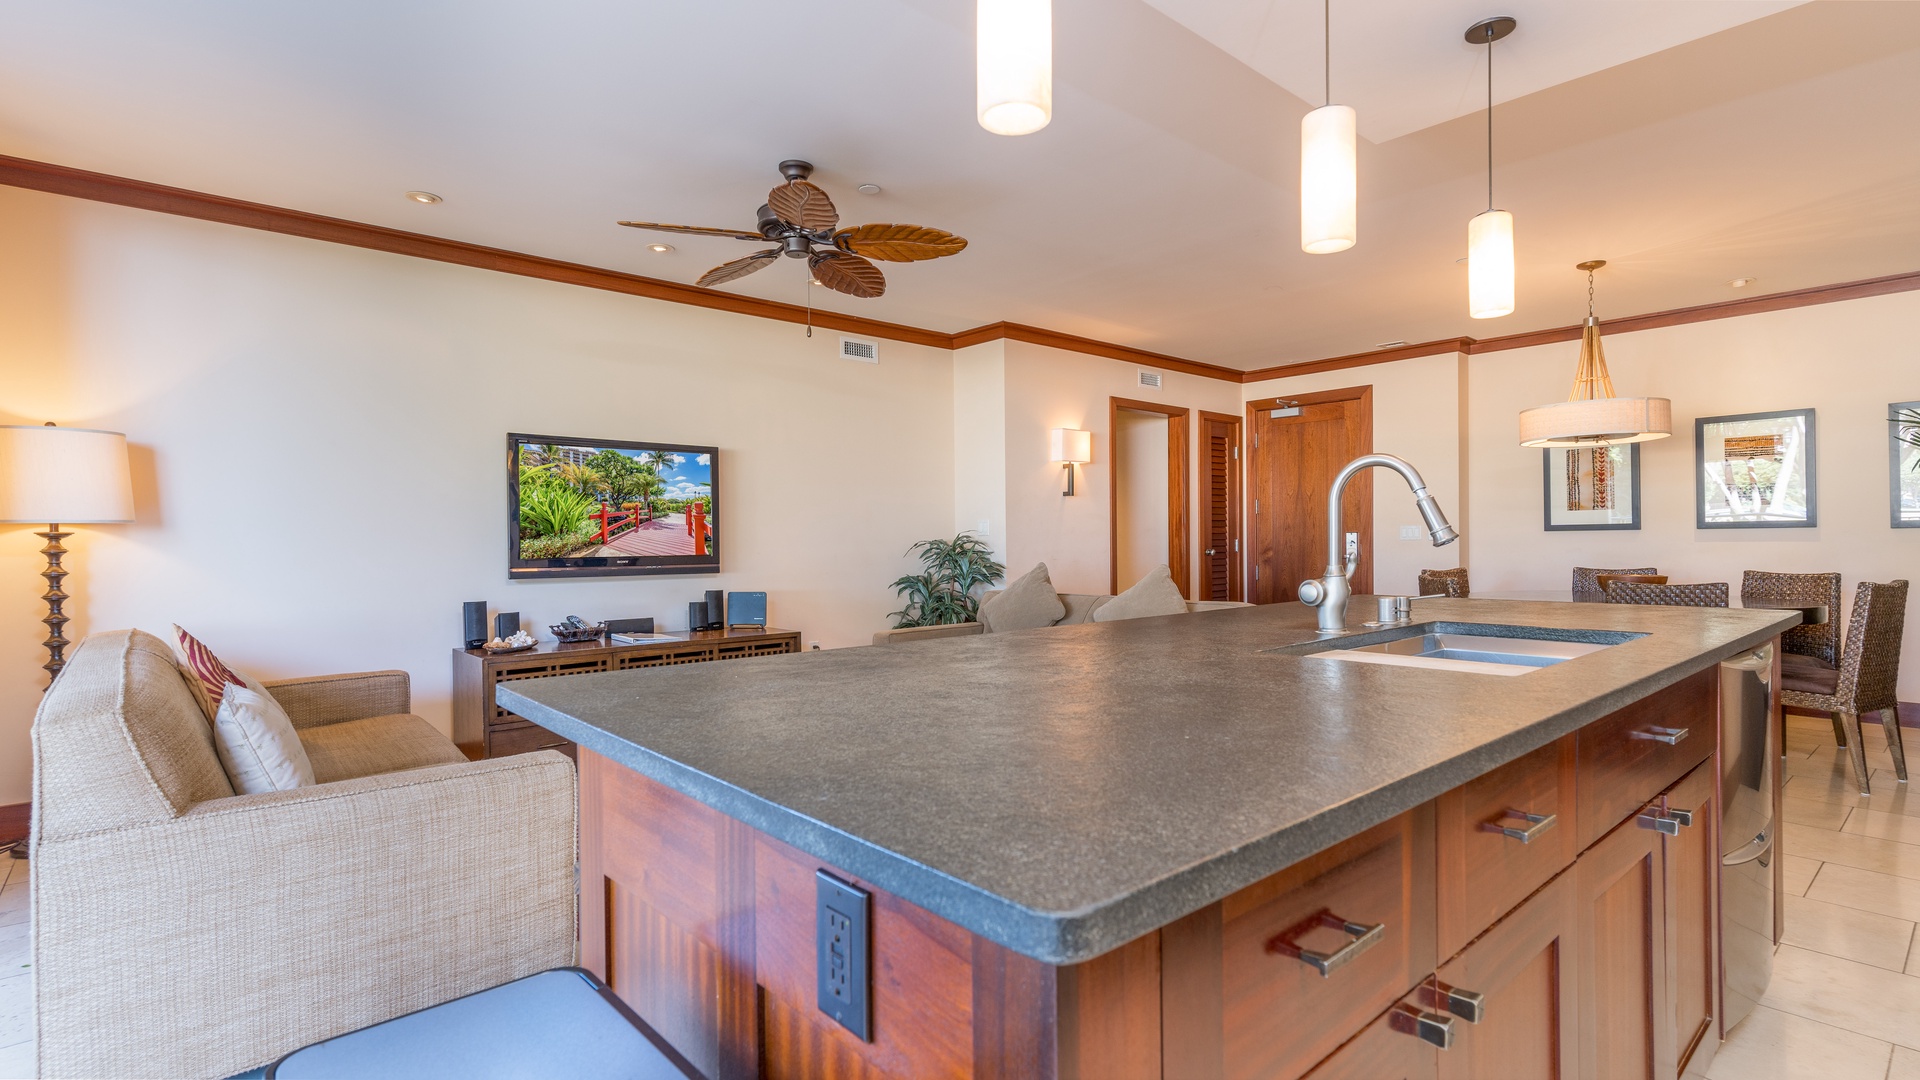 Kapolei Vacation Rentals, Ko Olina Beach Villas B202 - Another view of the layout from the kitchen perspective.